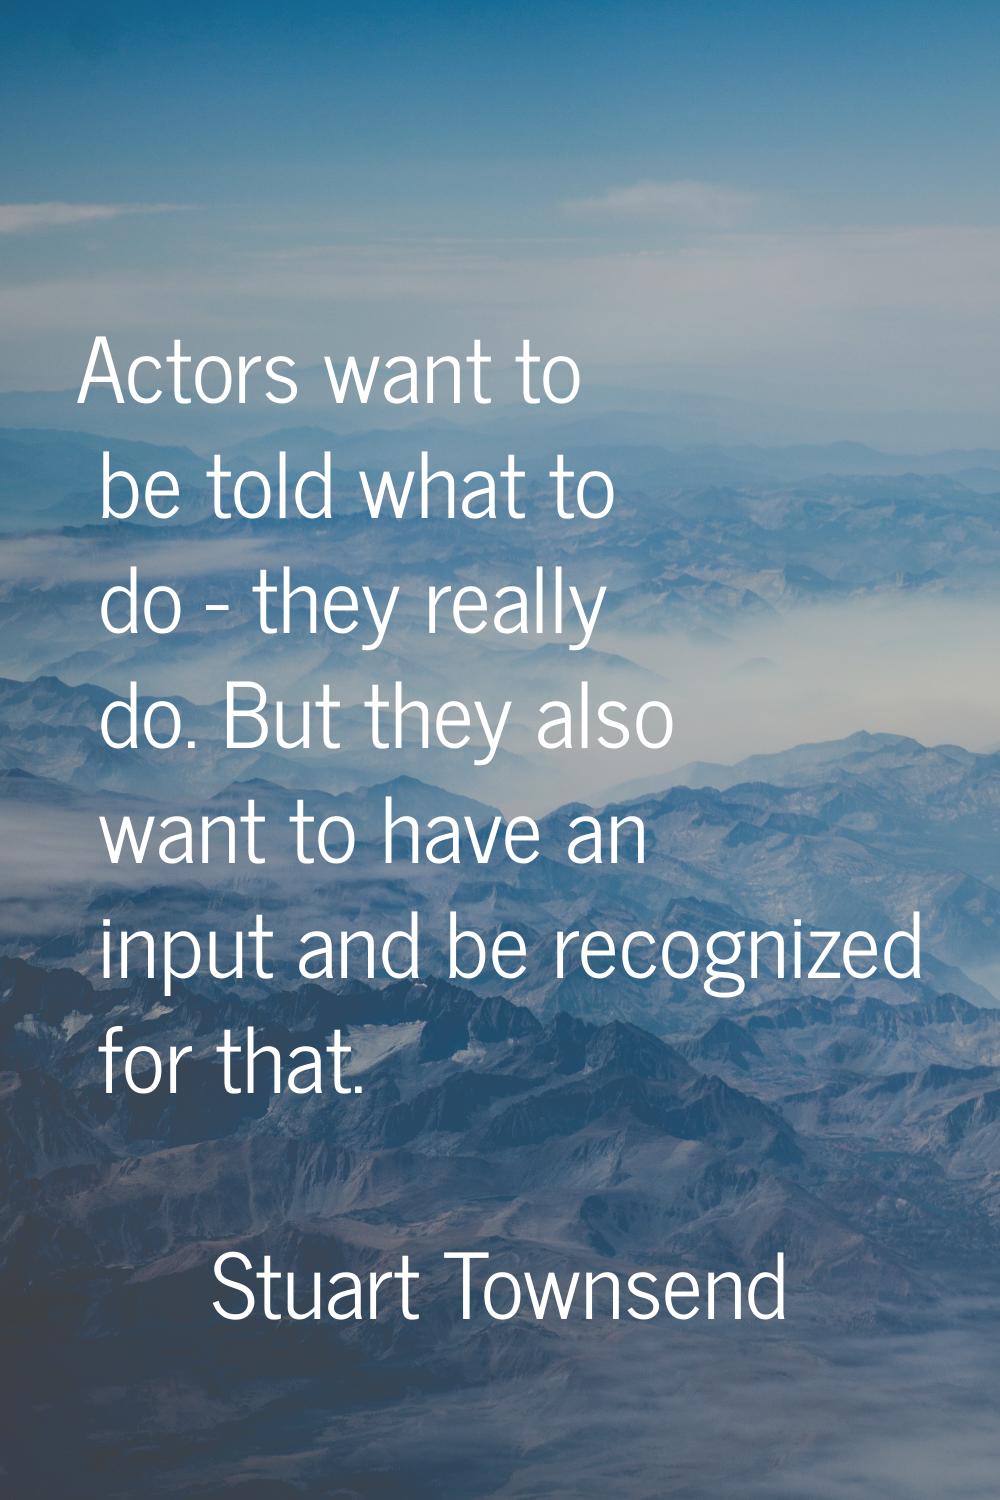 Actors want to be told what to do - they really do. But they also want to have an input and be reco